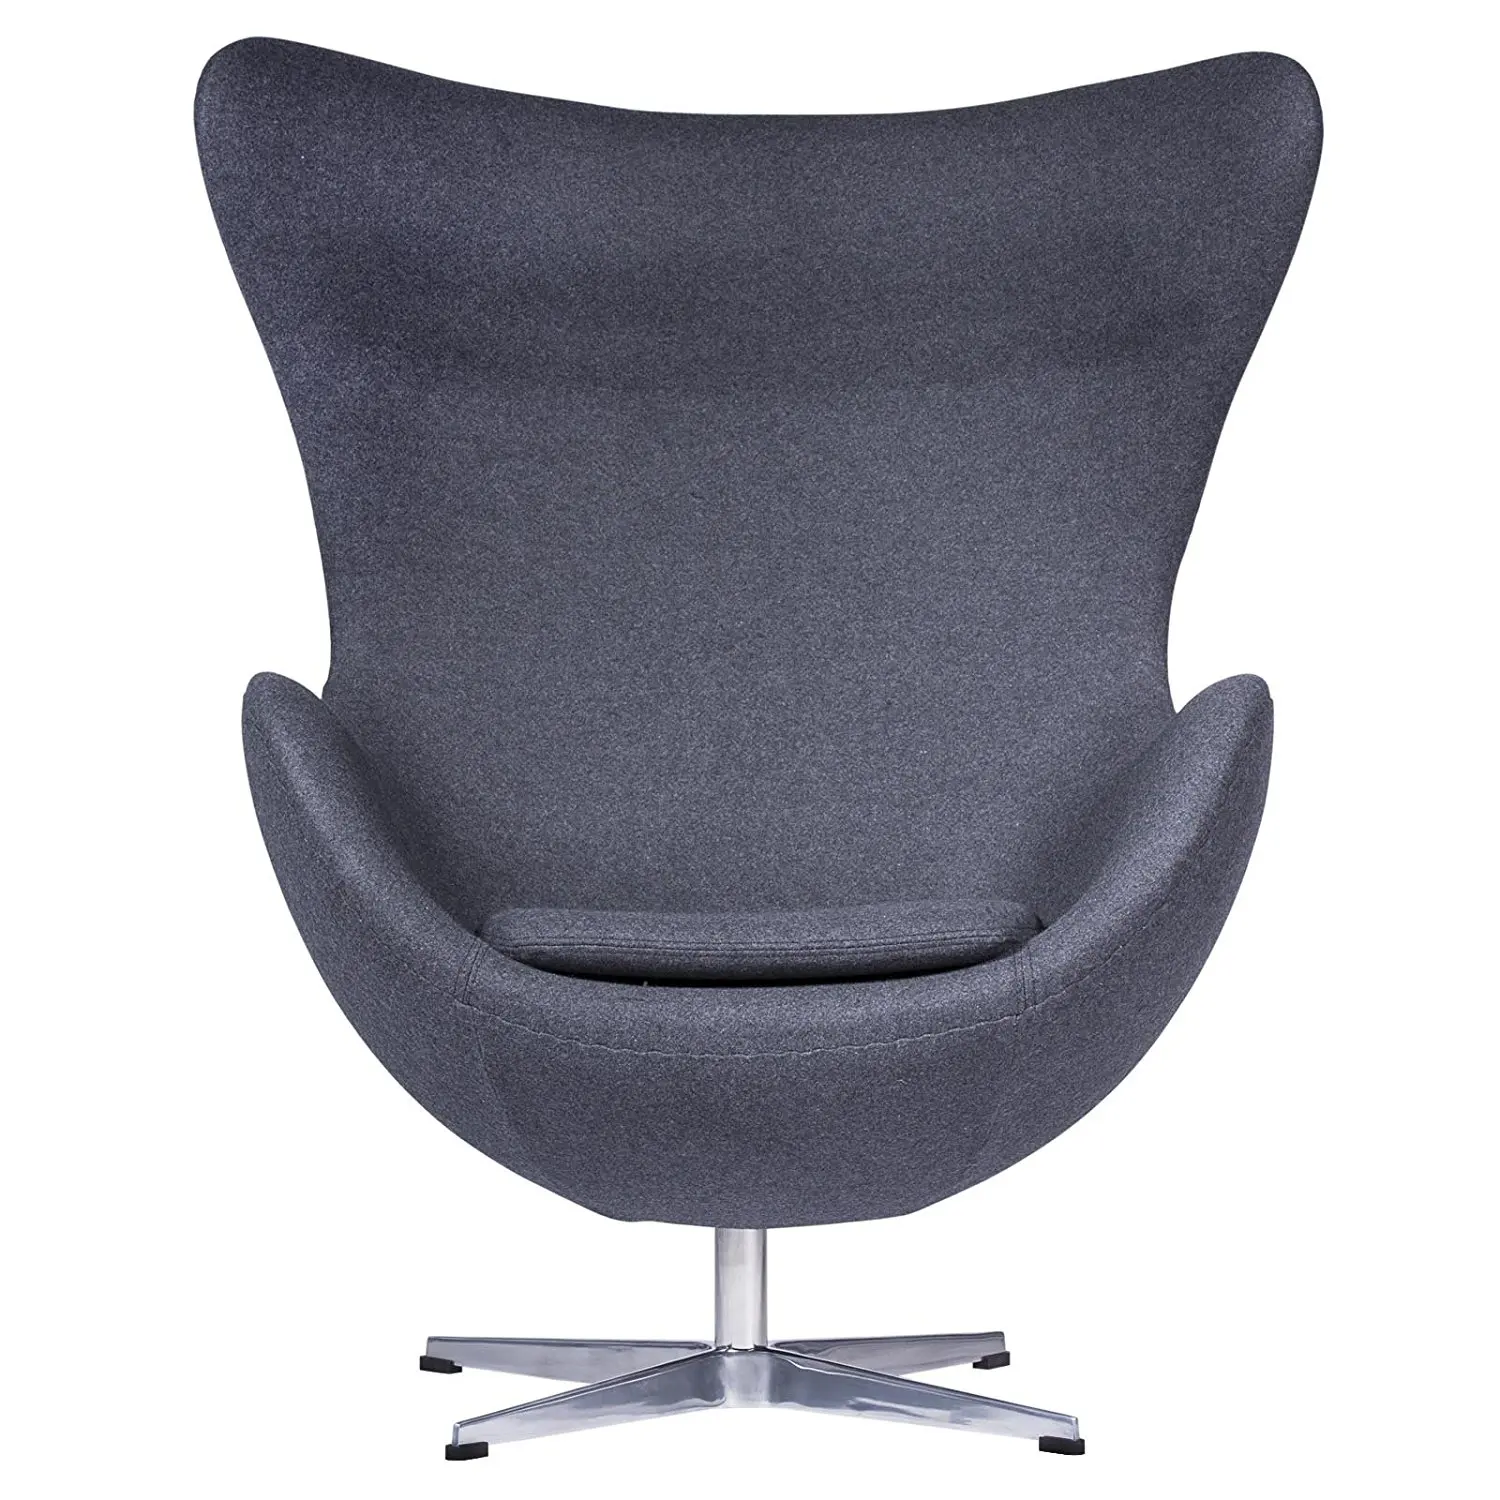 Cheap Egg Chair Suppliers, find Egg Chair Suppliers deals on line at